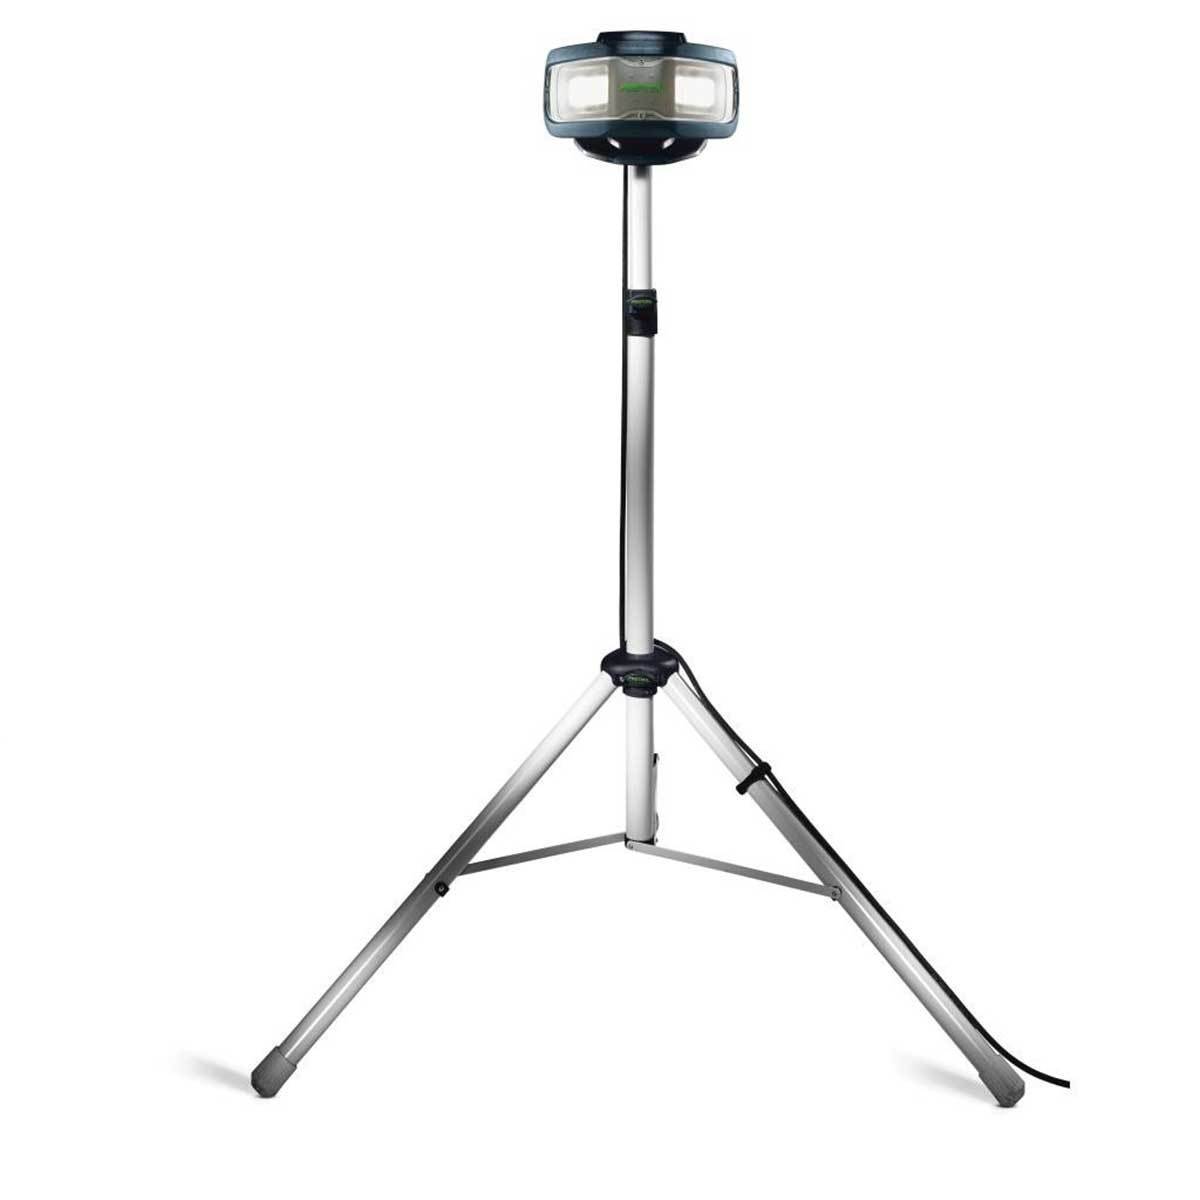 The SysLite Duo sits on the fully-deployed tripod facing forward, the its power cord neatly attached to the tripod.